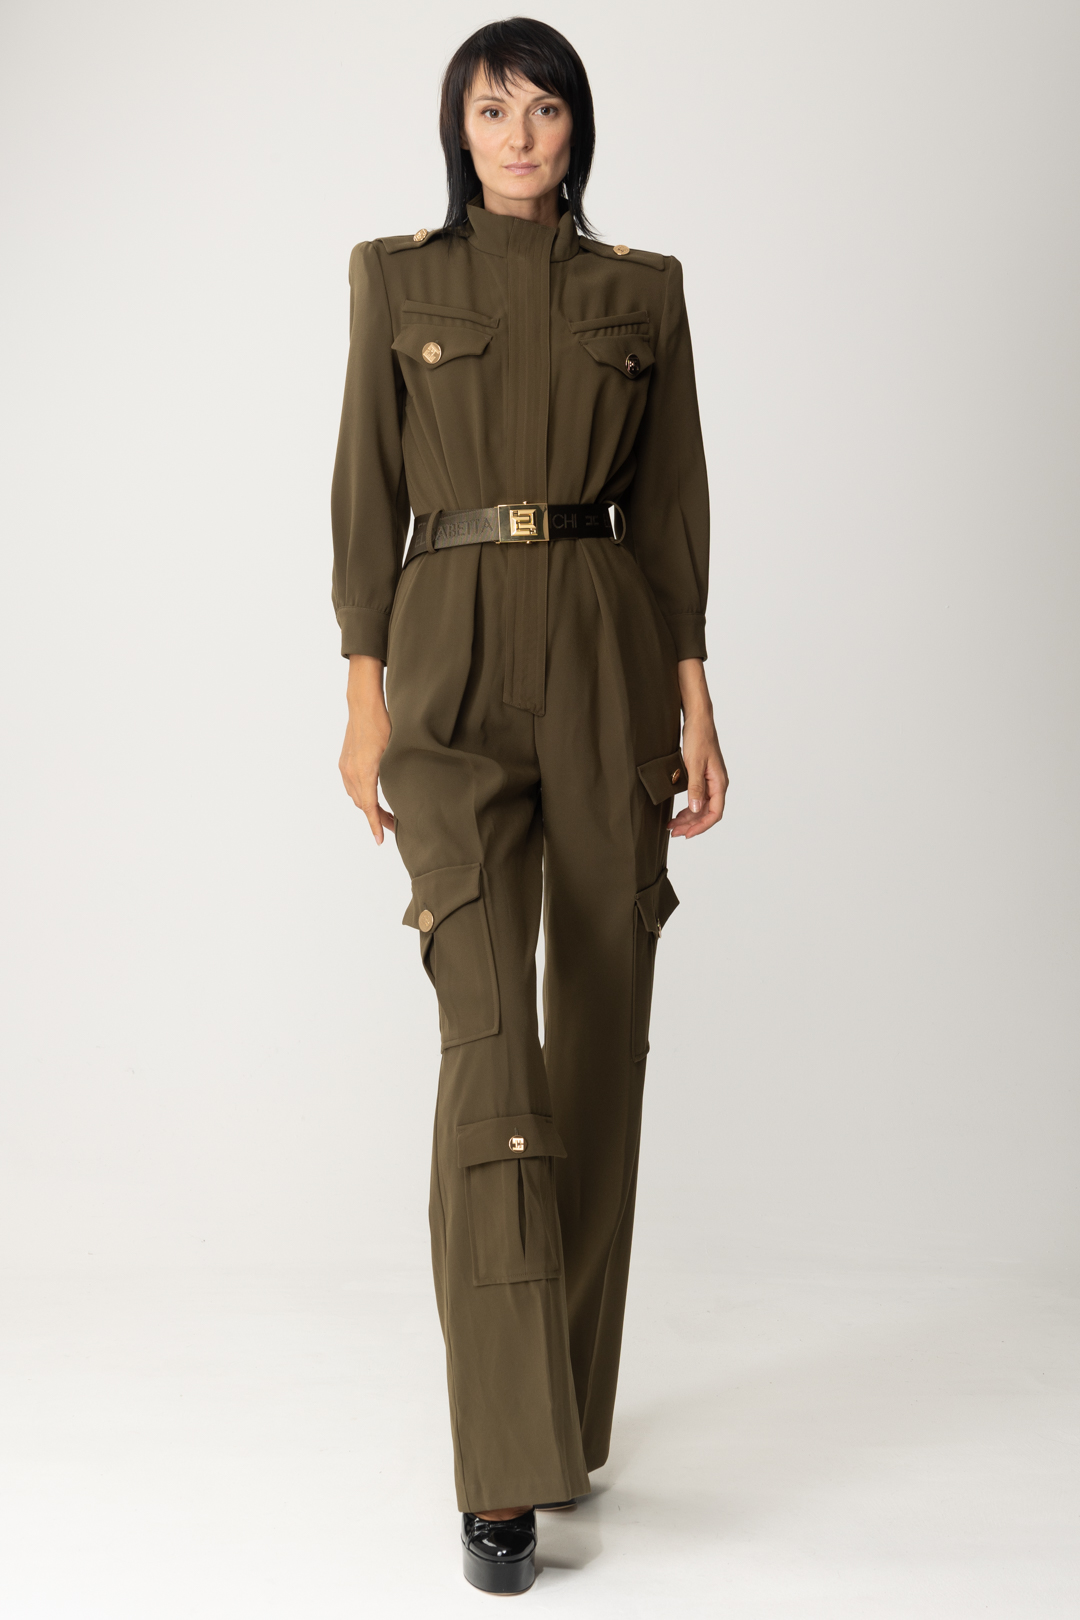 Preview: Elisabetta Franchi Belted cargo jumpsuit ARMY